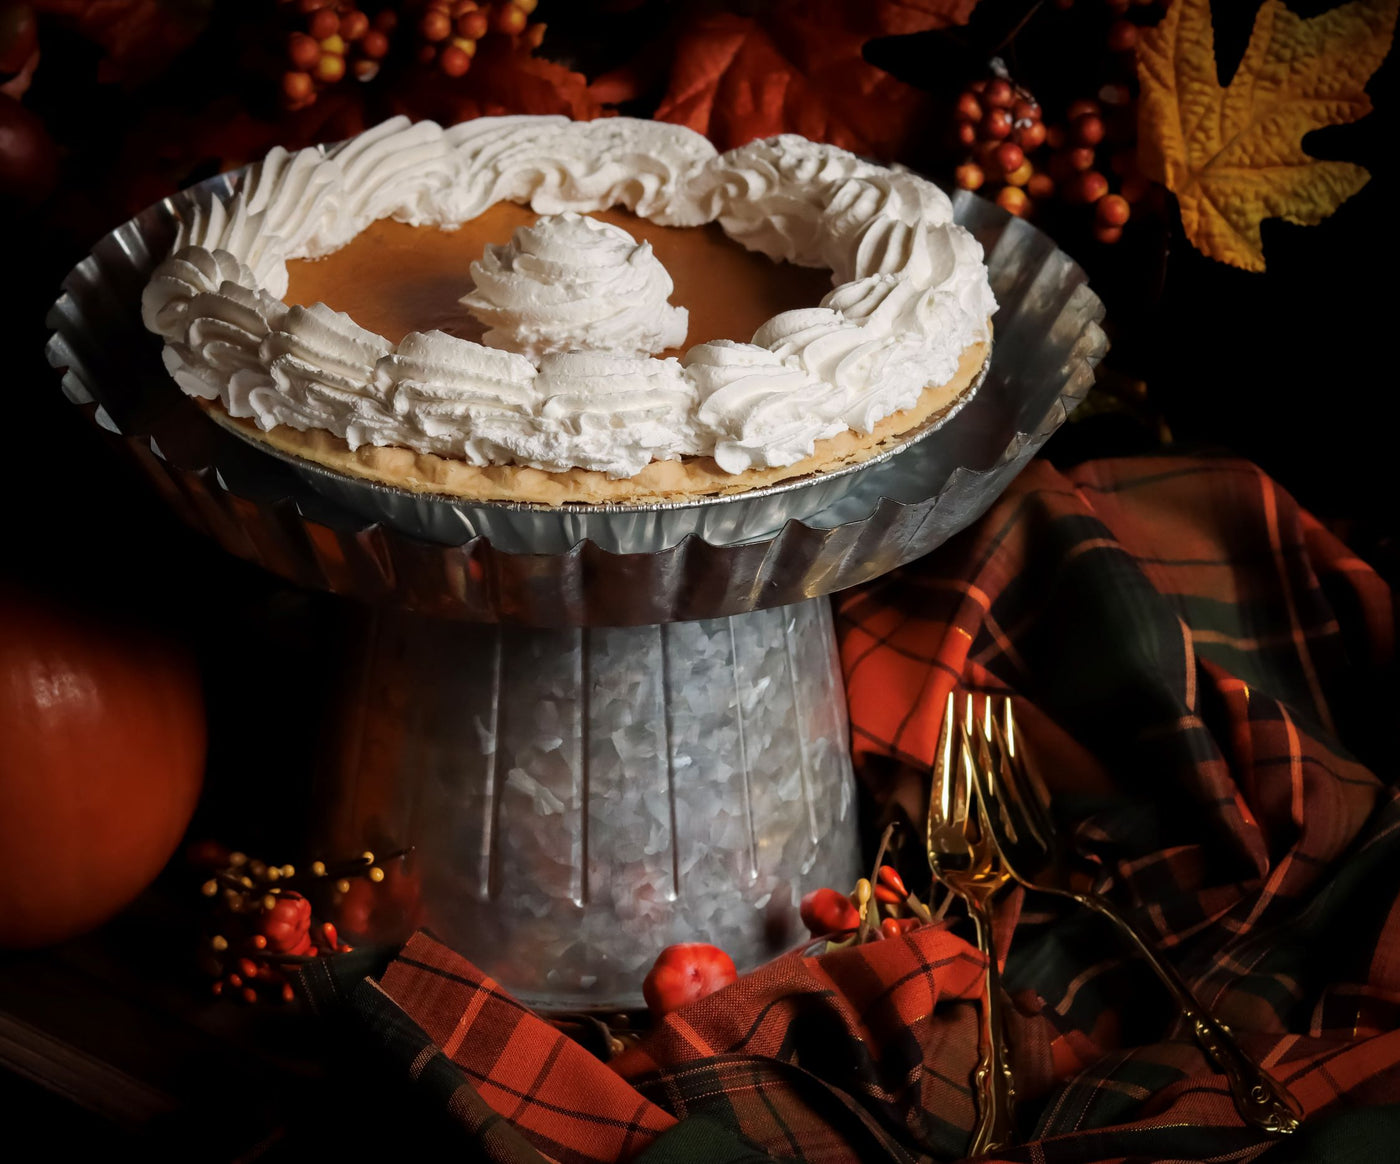 Large Family Thanksgiving Dessert Bar SERVES 24 | Thanksgiving Dinner Dessert Package | Delivery Pies and Desserts